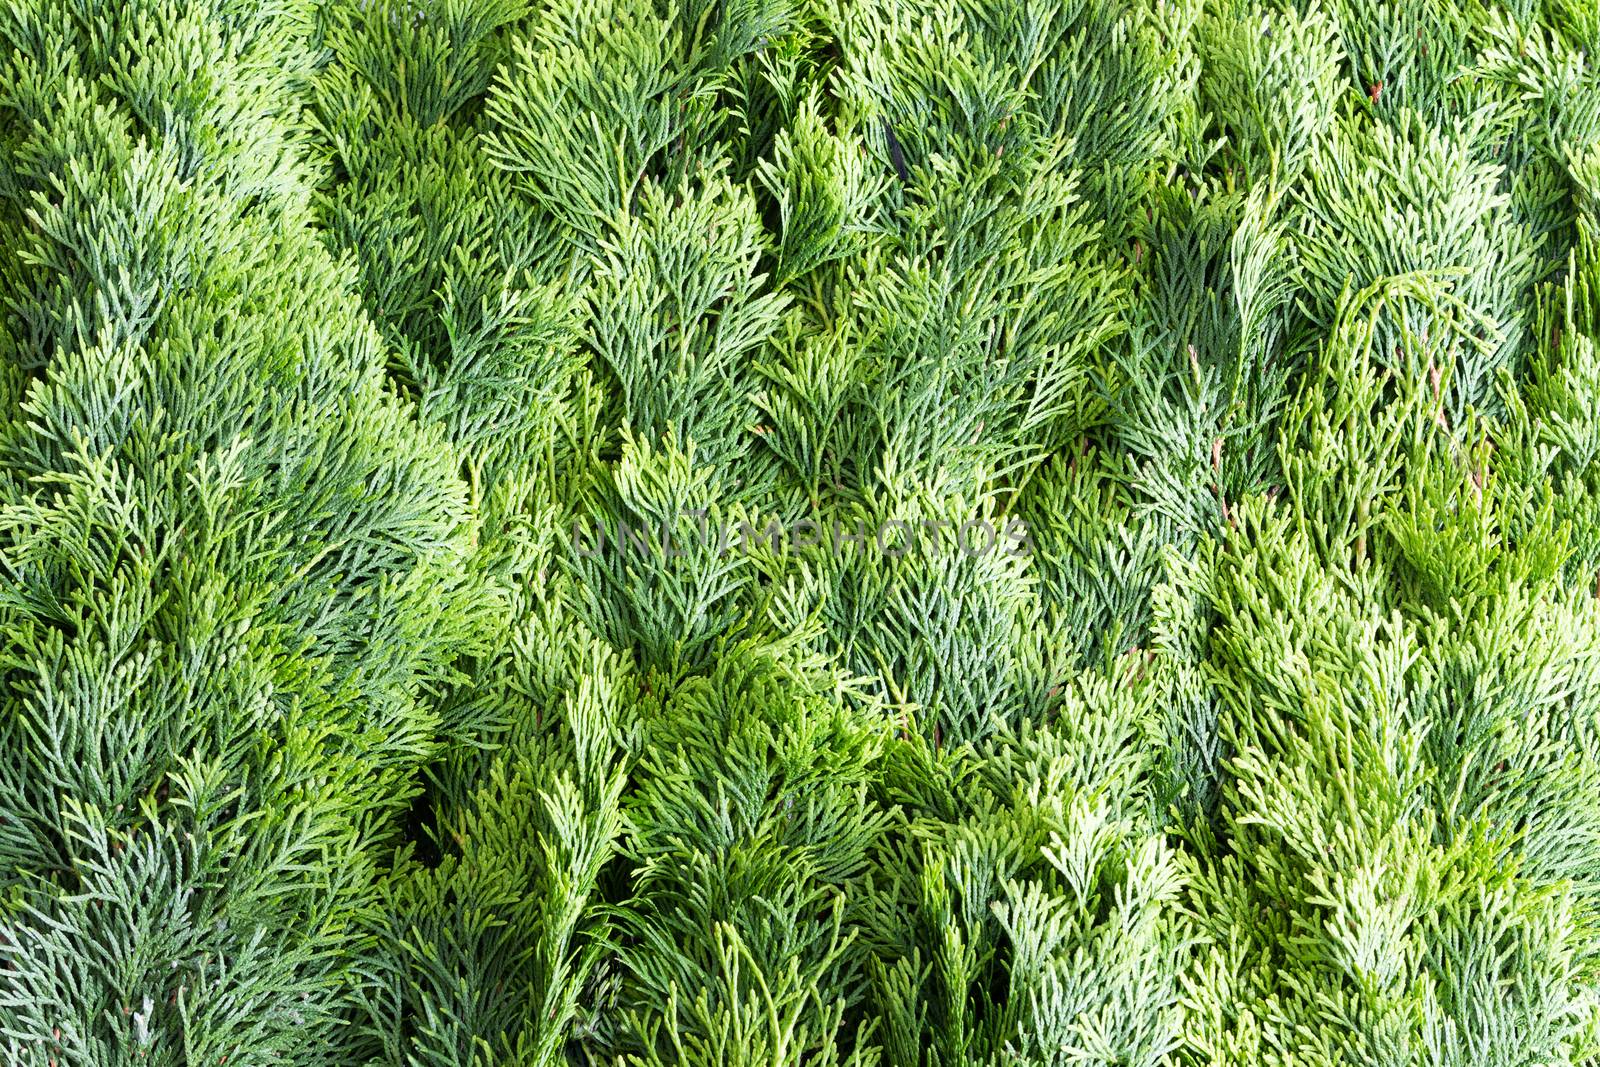 Arborvitae leaves background with a closely packed layer of evergreen fronds or foliage from the Thuja tree, a popular ornamental Arborvitae grown in many gardens